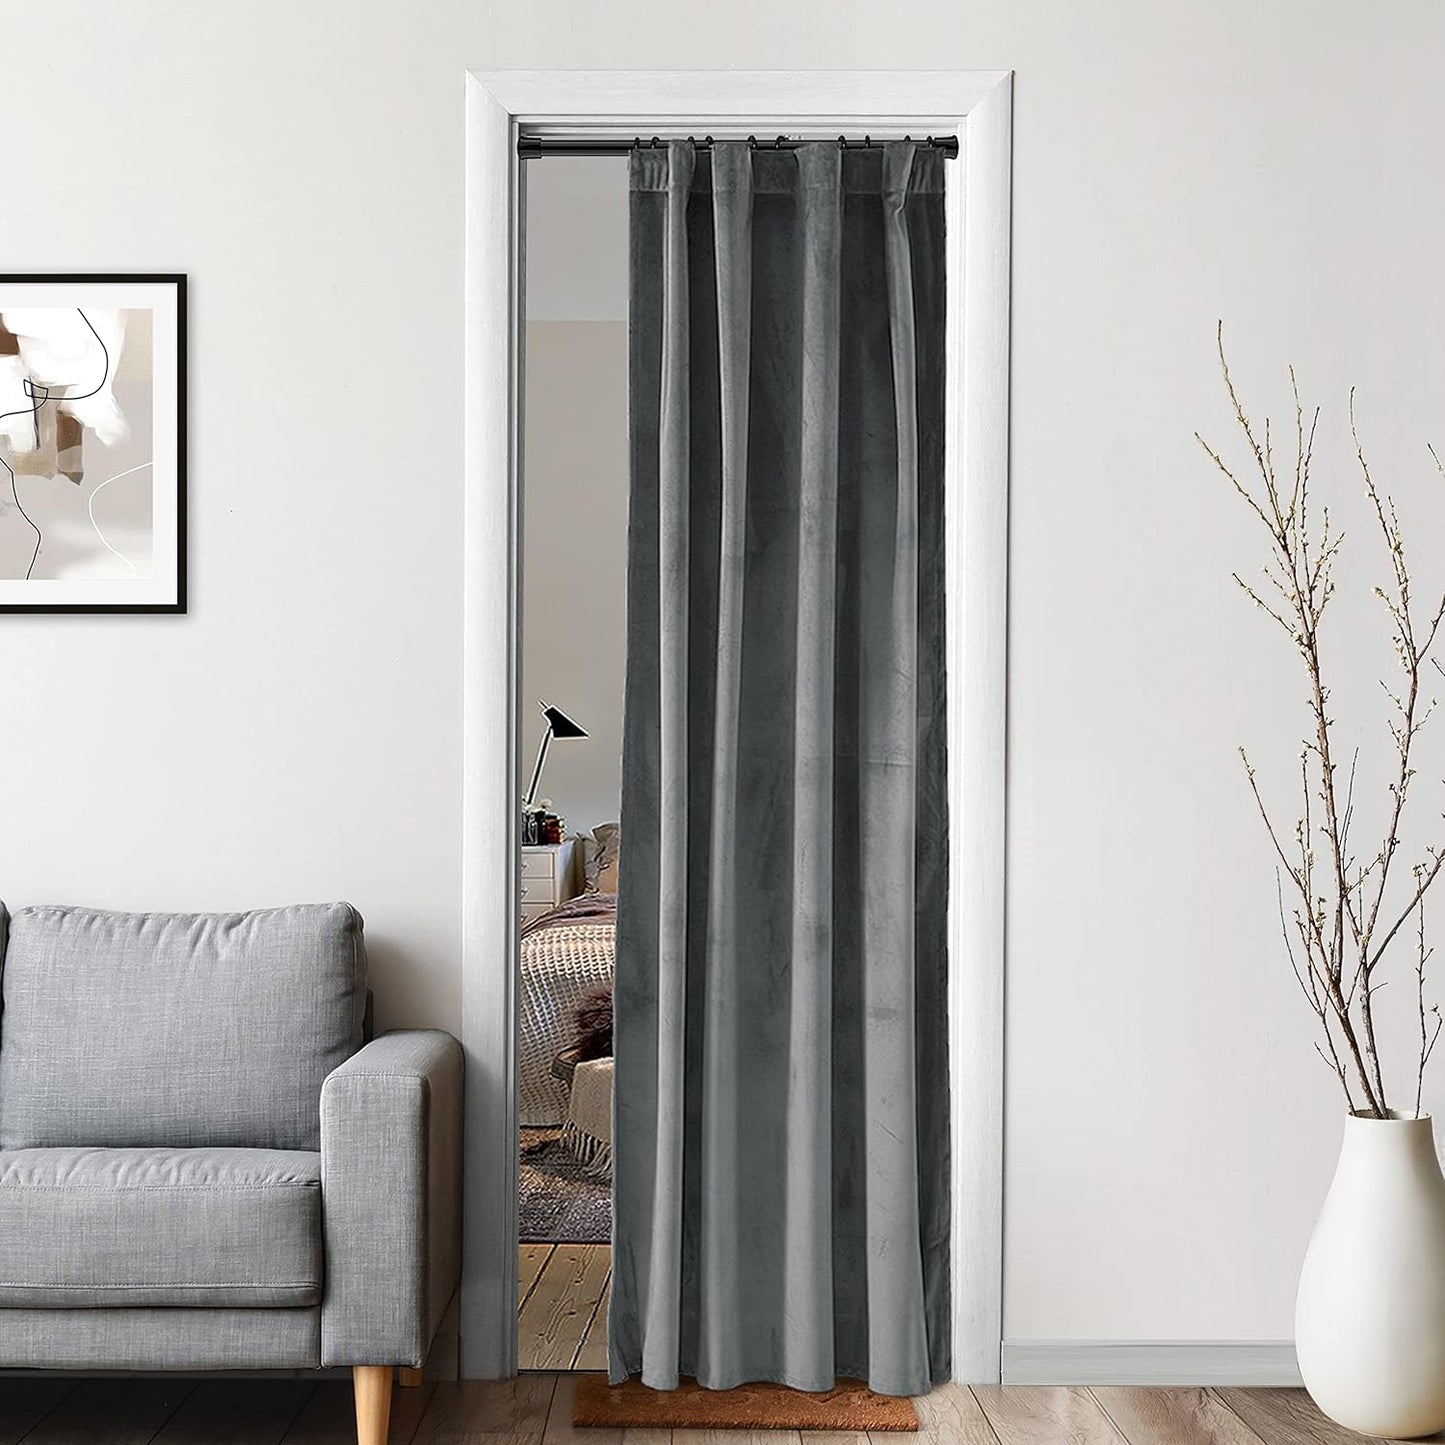 XTMYI Velvet Blackout Door Curtain Panels for Bedroom,Thermal Insulated Winter Warm Back Tab Rod Pocket Black Out Cover Doorway Curtains Privacy/Window Drapes,80 Inch Length  XTMYI TEXTILE Grey 38X80 